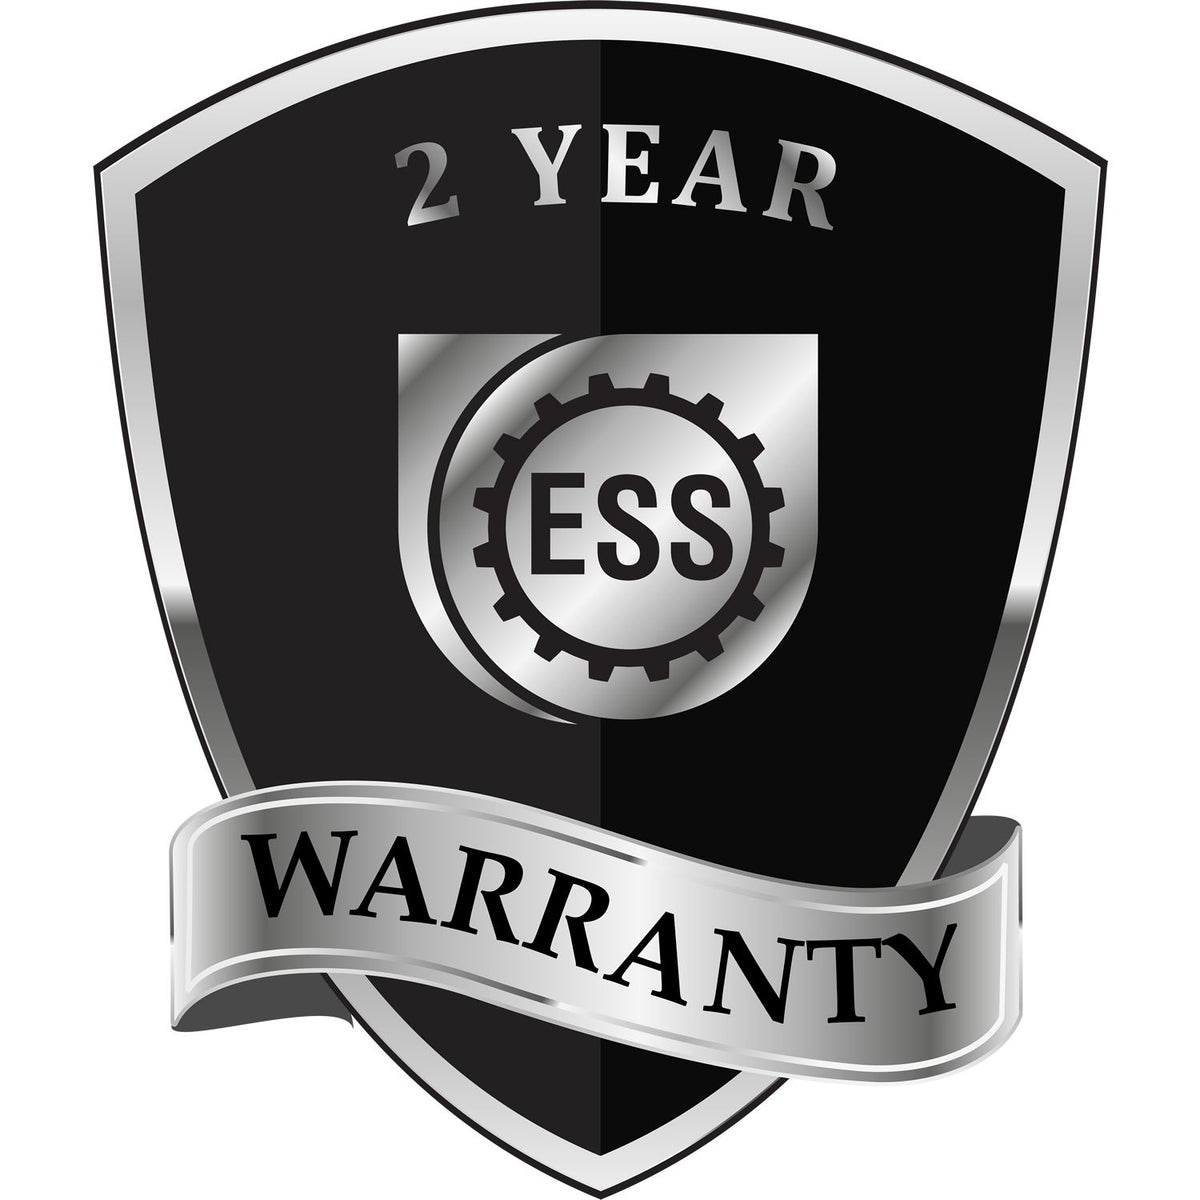 A badge or emblem showing a warranty icon for the New Hampshire Engineer Desk Seal